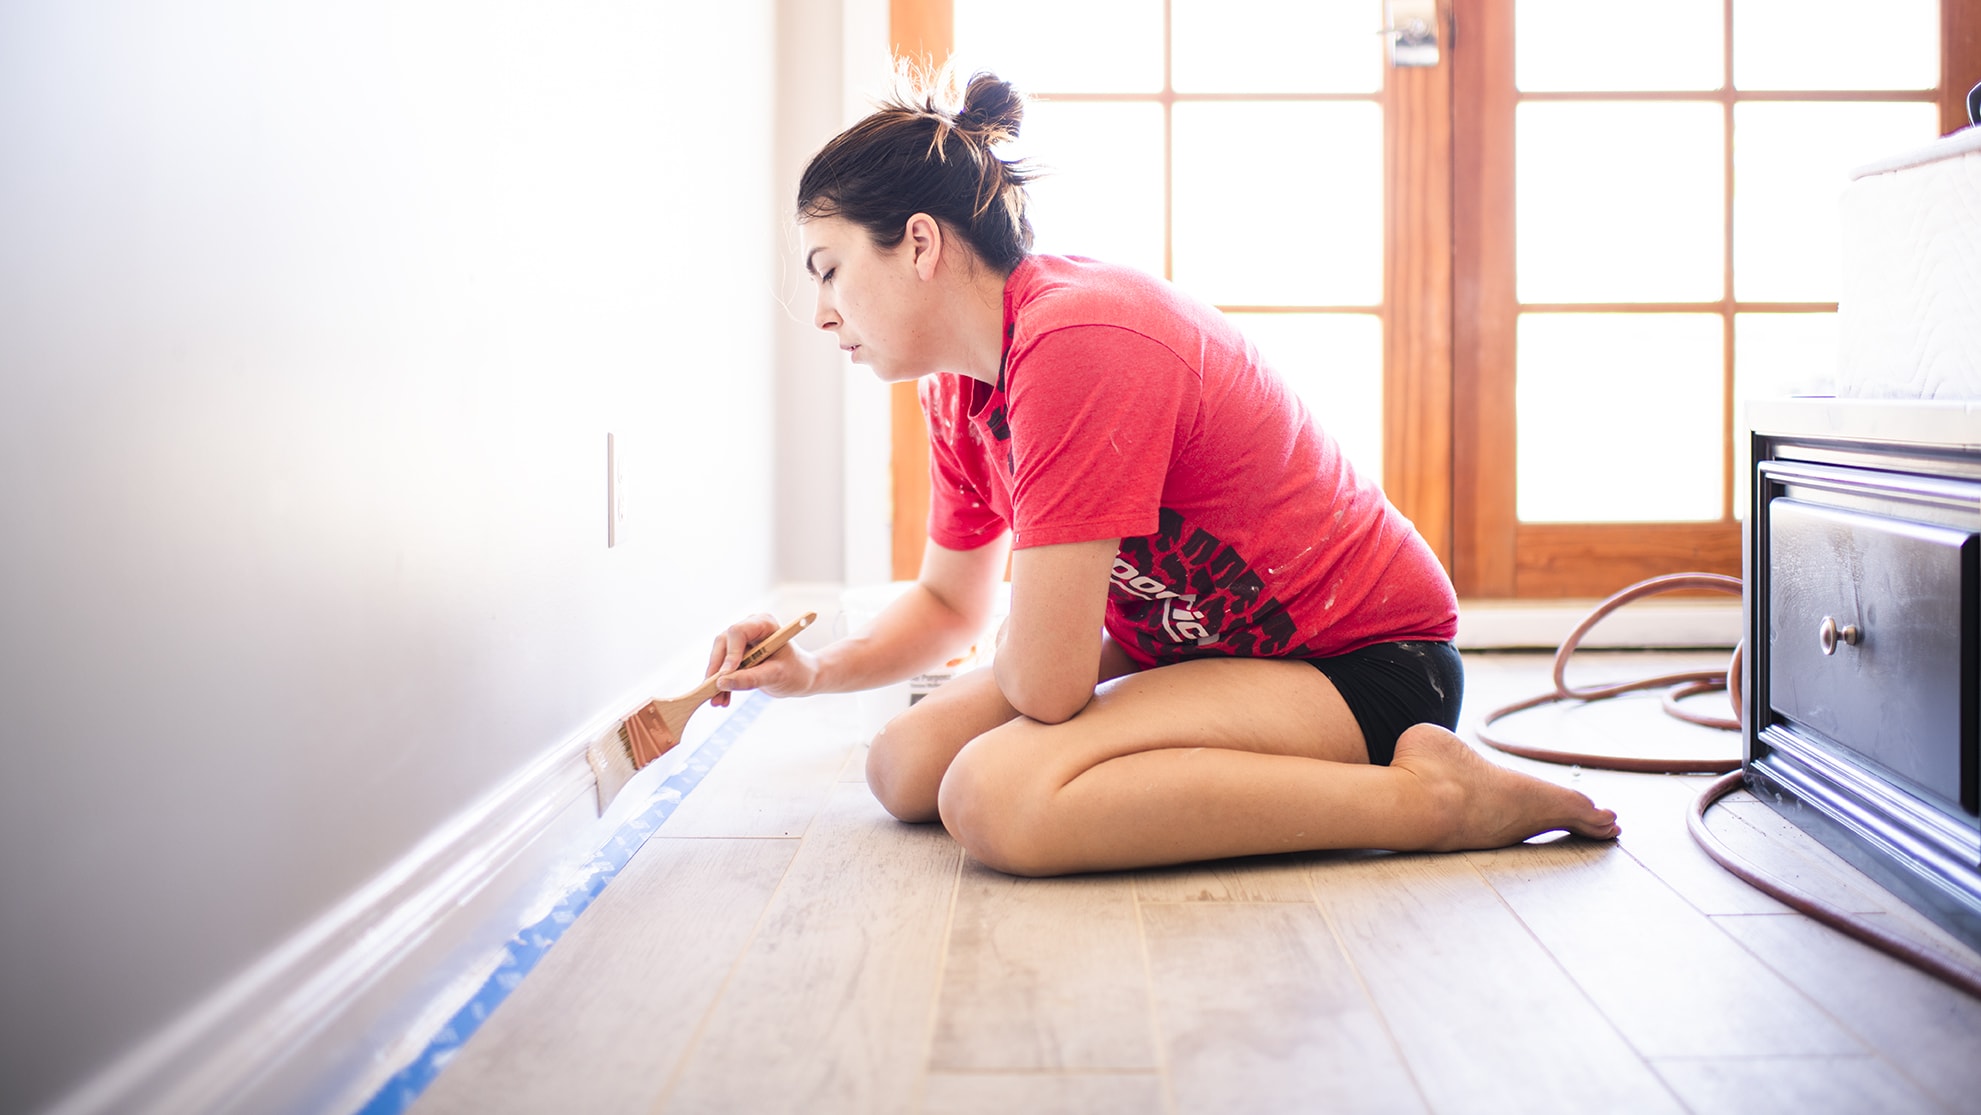 Woman painting base boards